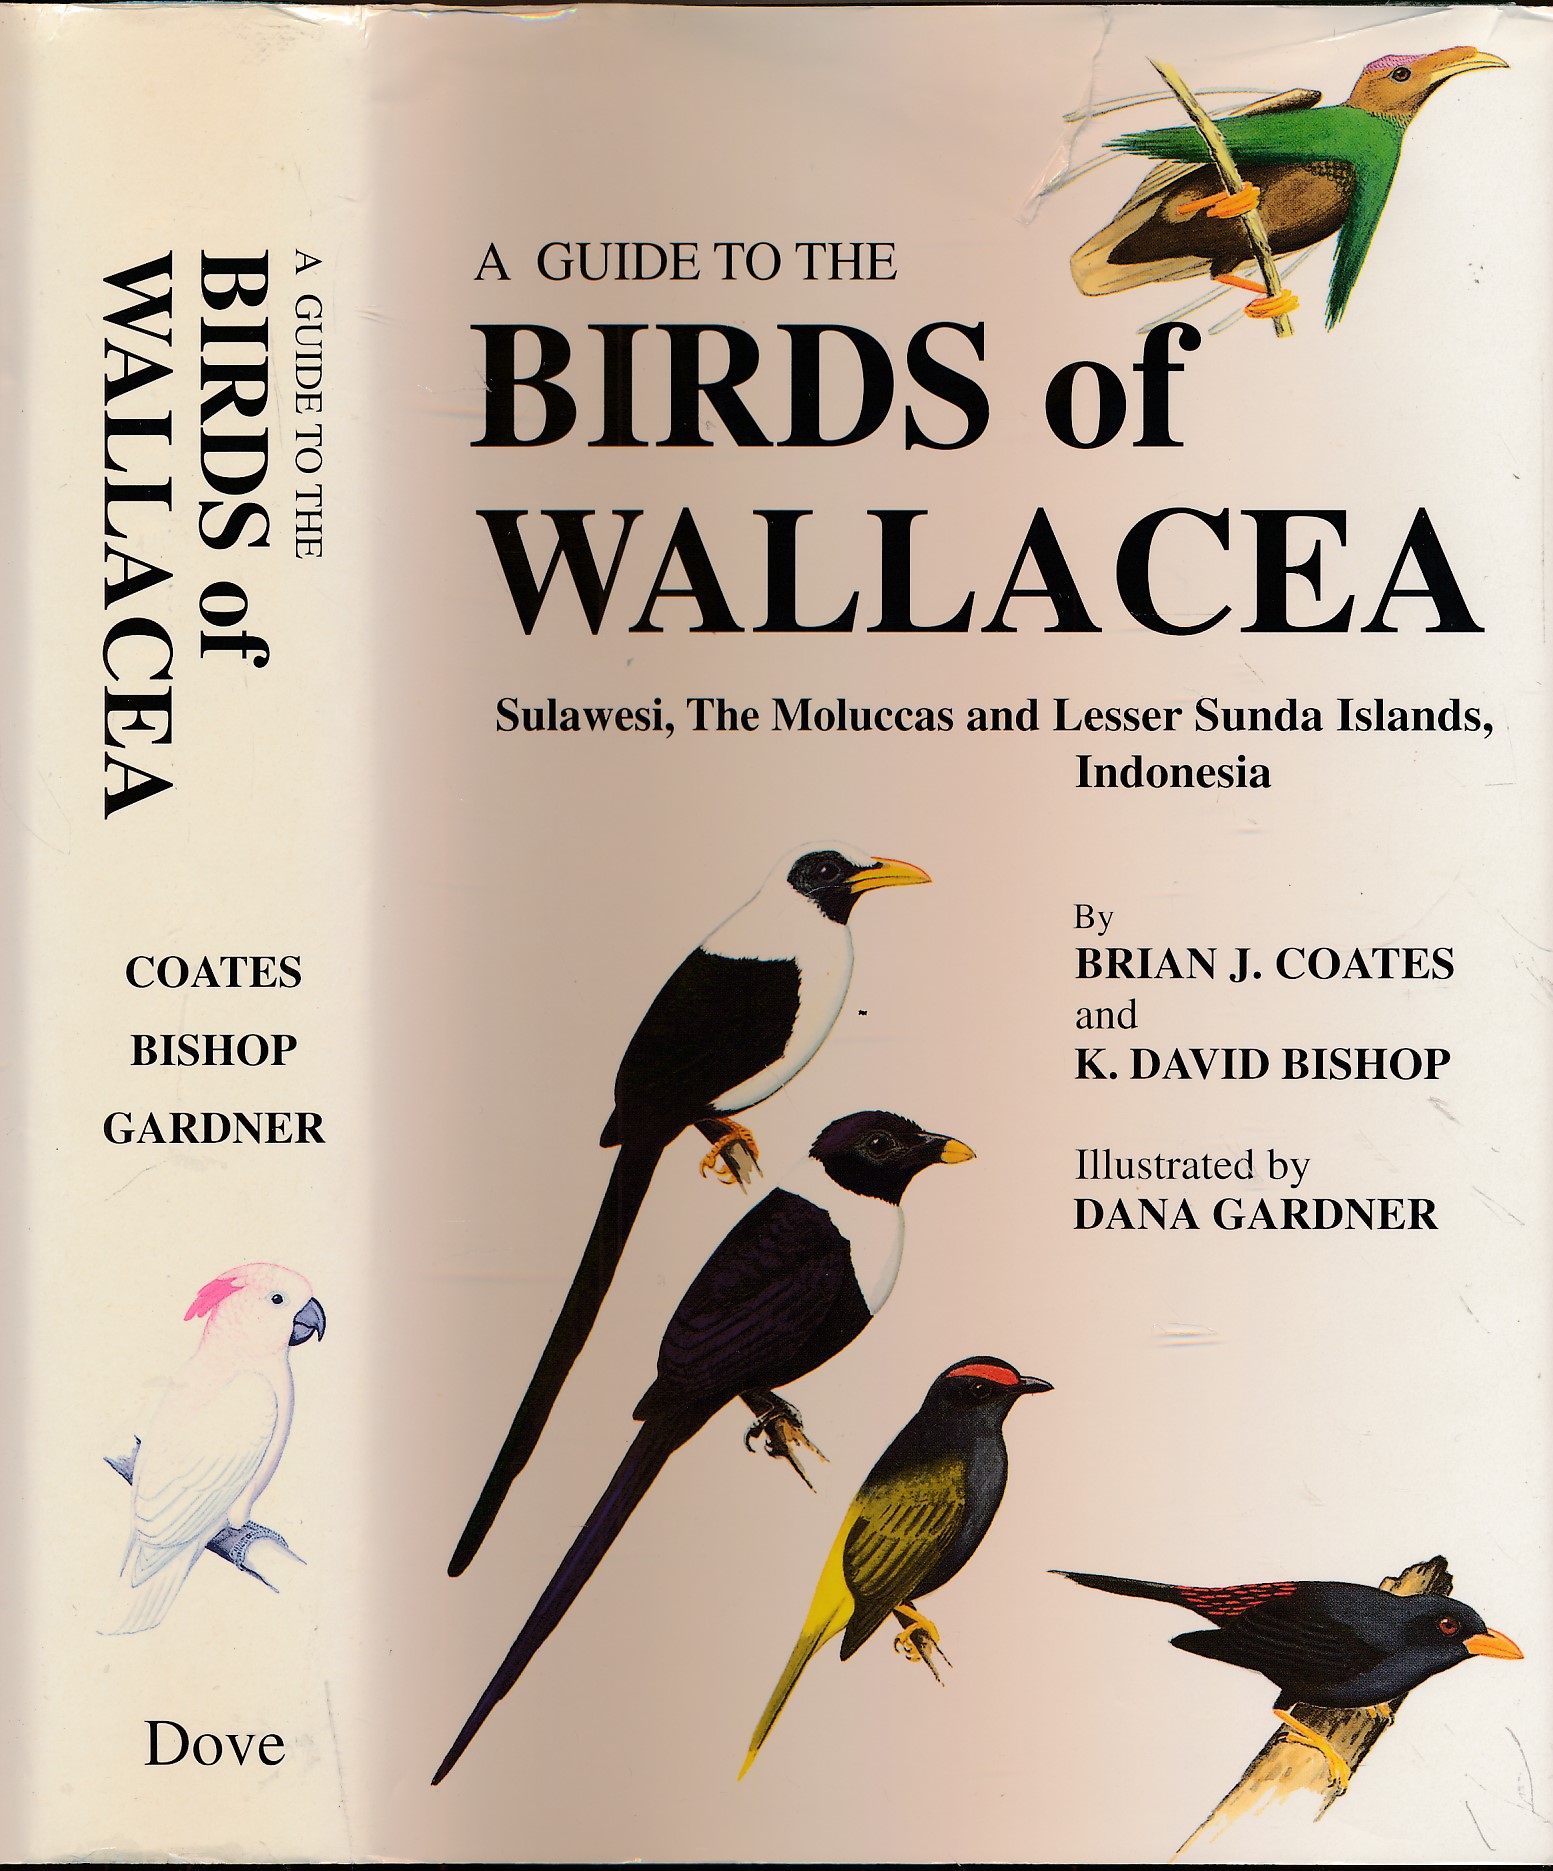 A Guide to the Birds of Wallacea, Sulawesi, The Moluccas and Lesser Sunda Islands, Indonesia.